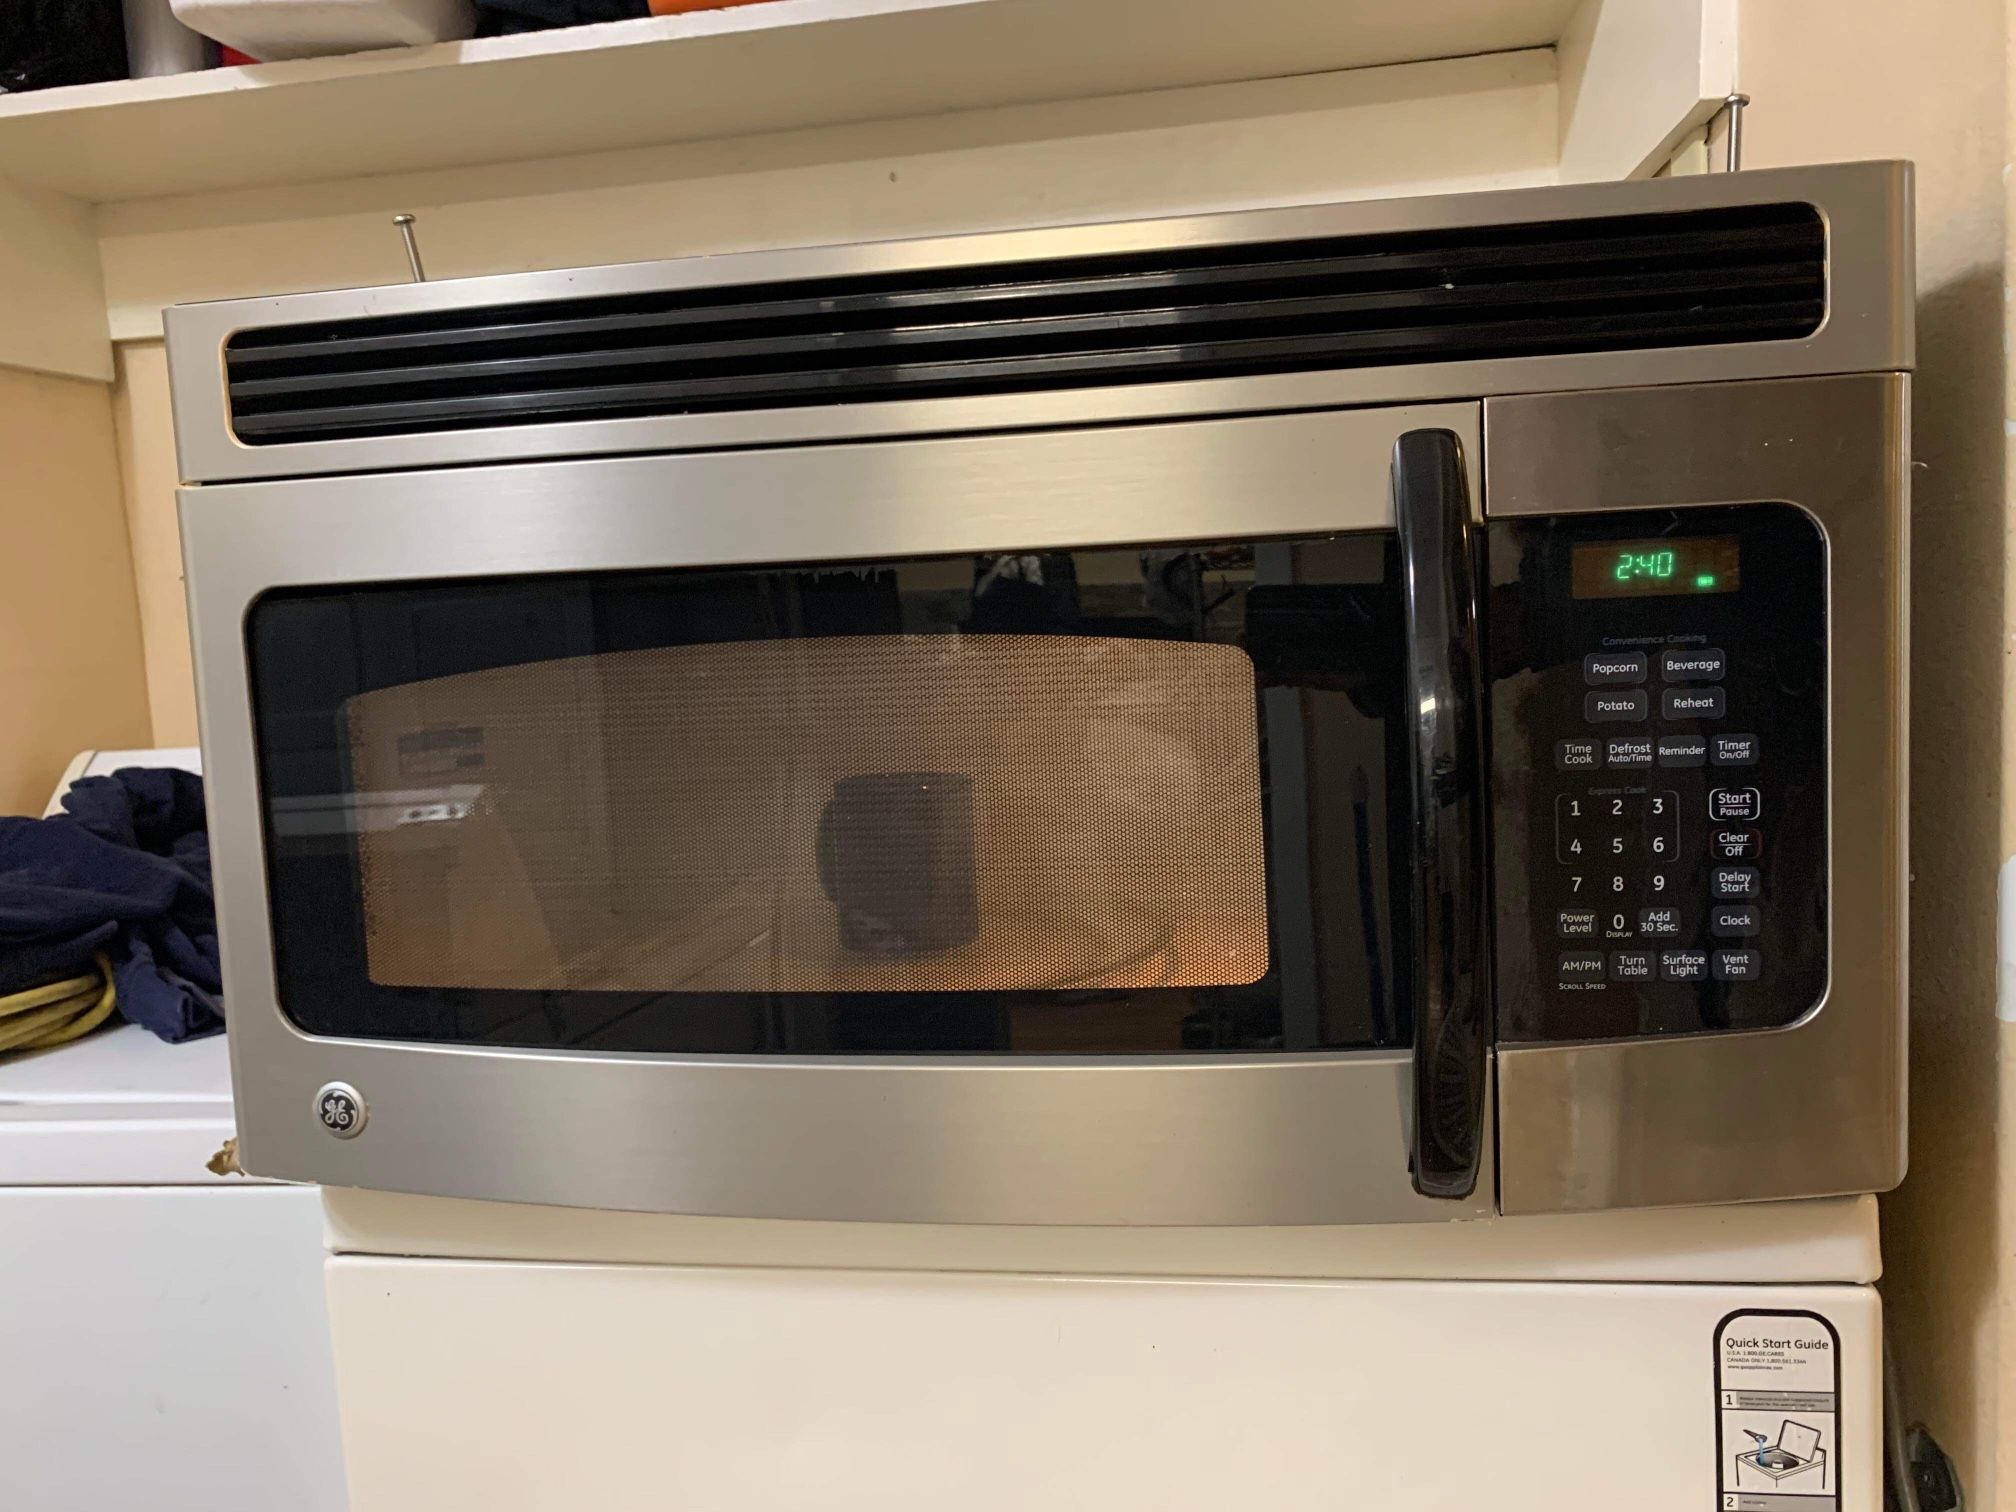 GE Over the Range Microwave Oven